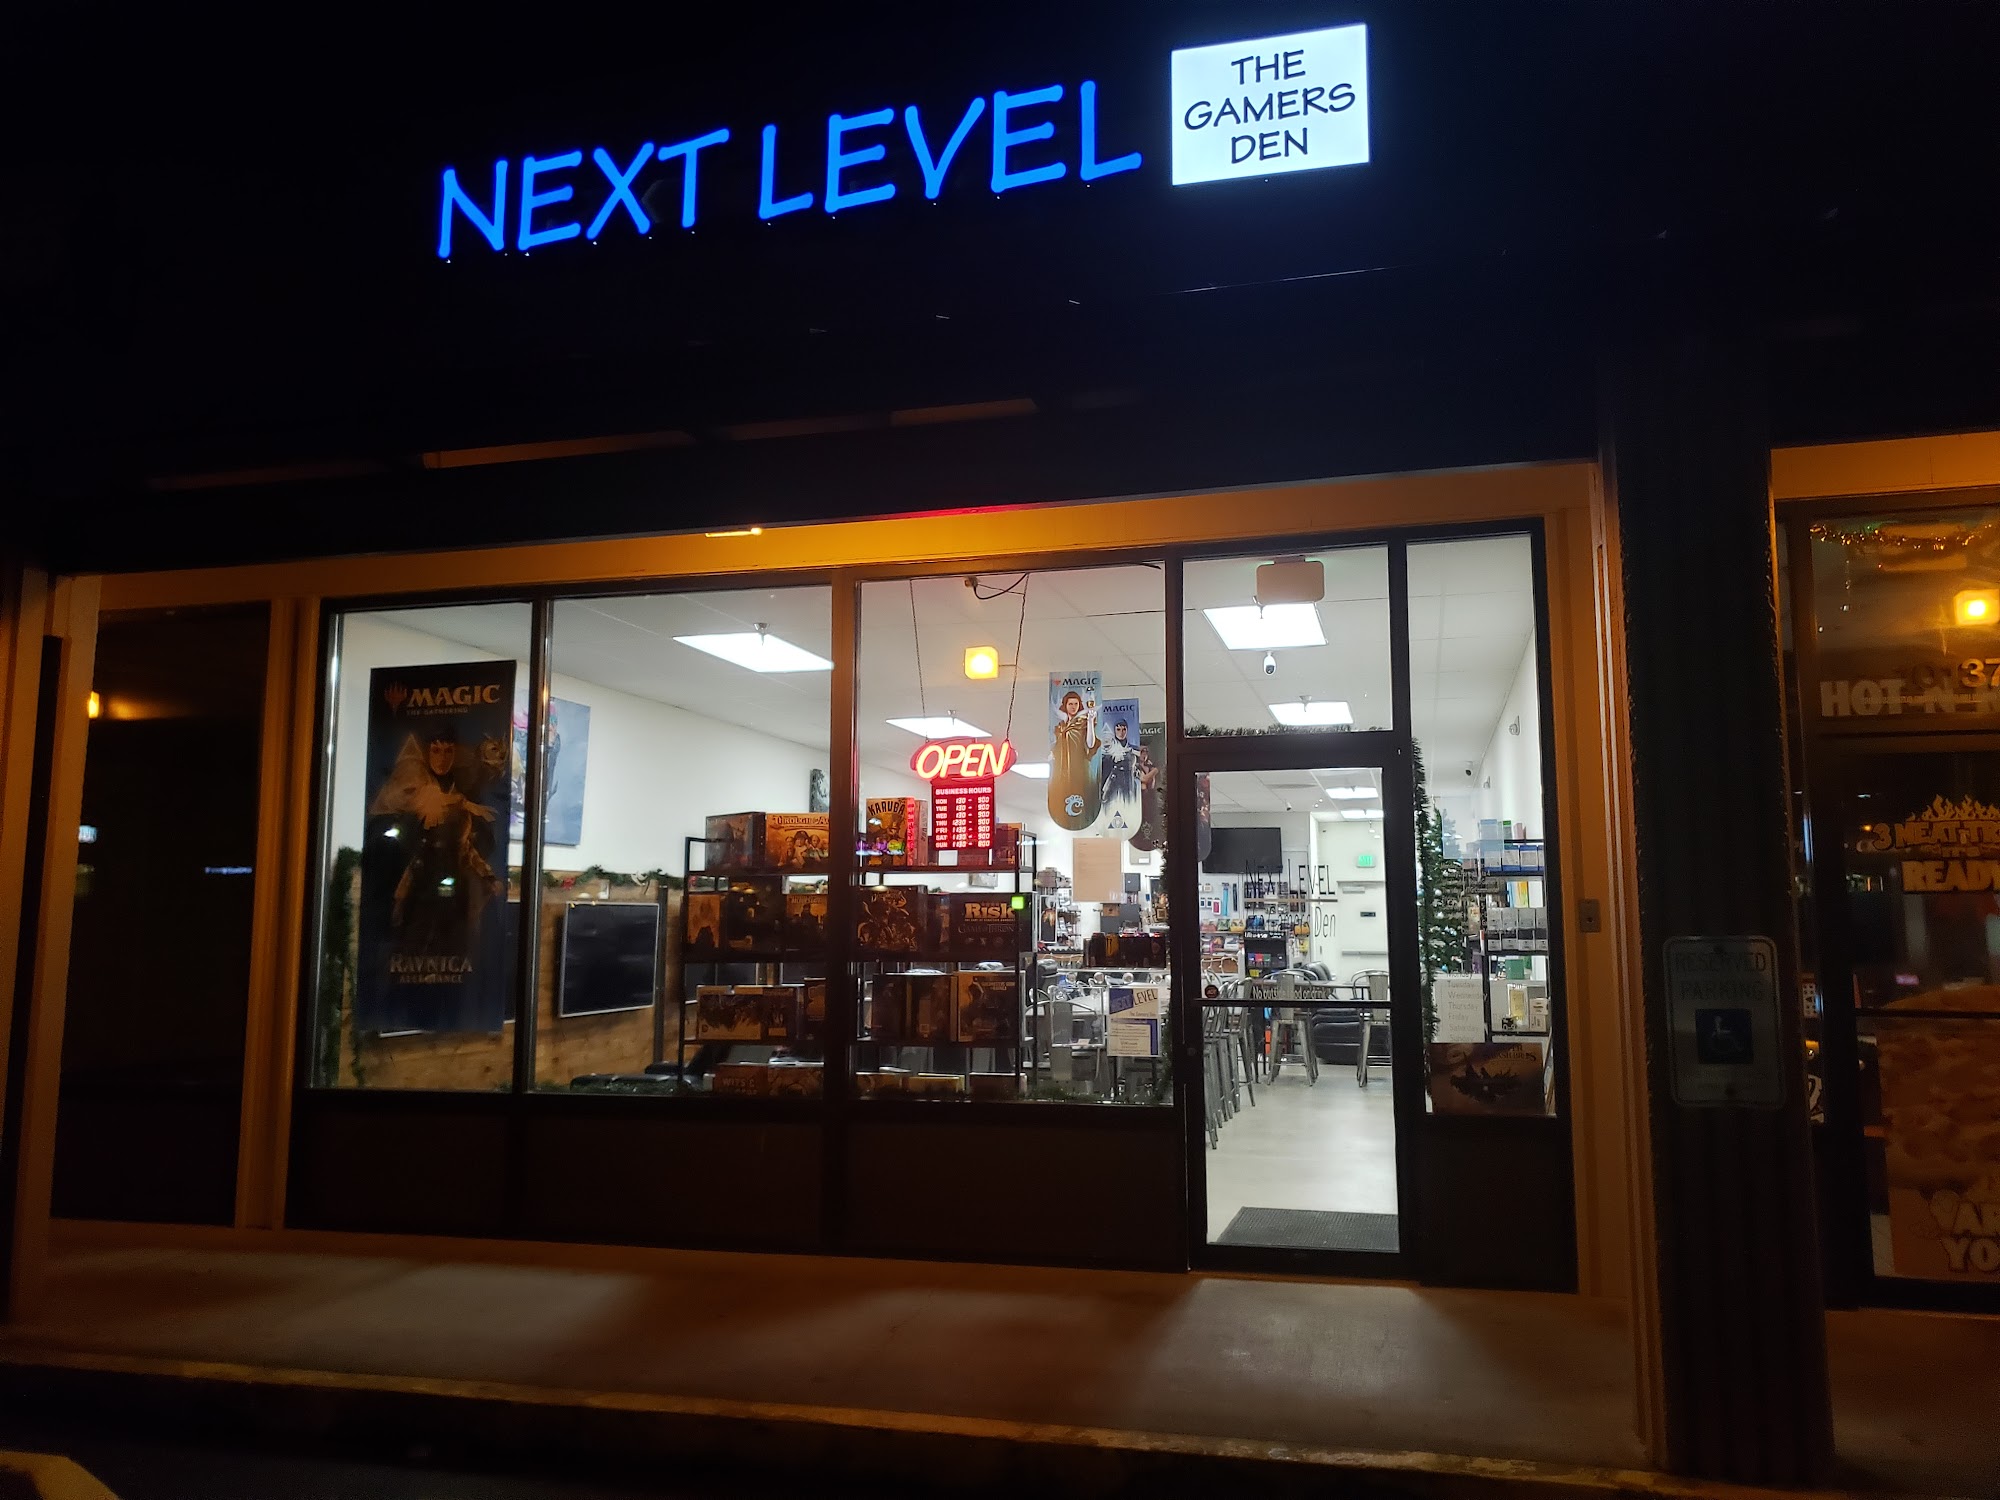 Next Level The Gamers Den